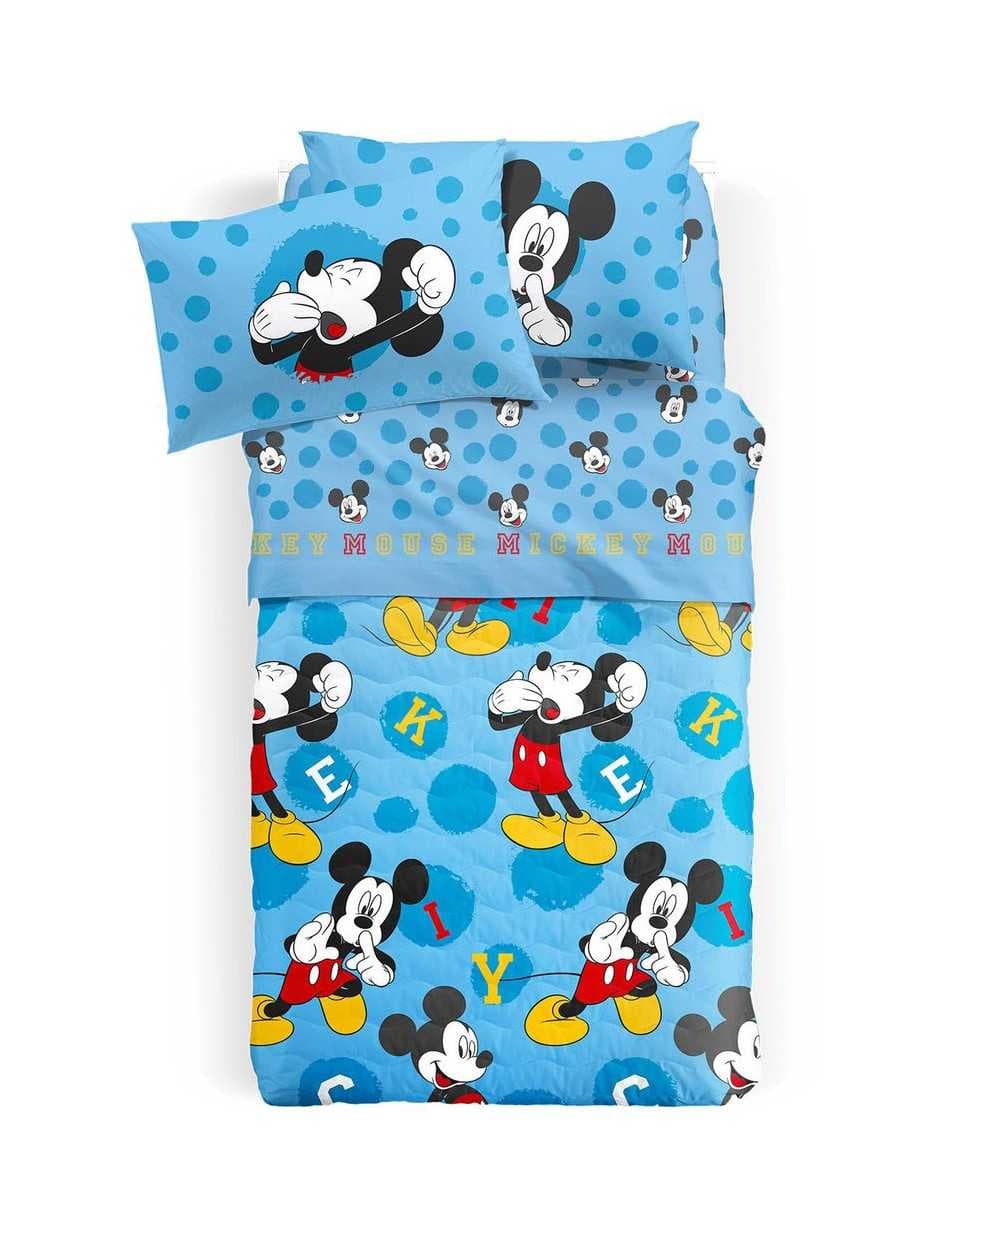 Comforter SINGLE BED Mickey Mouse